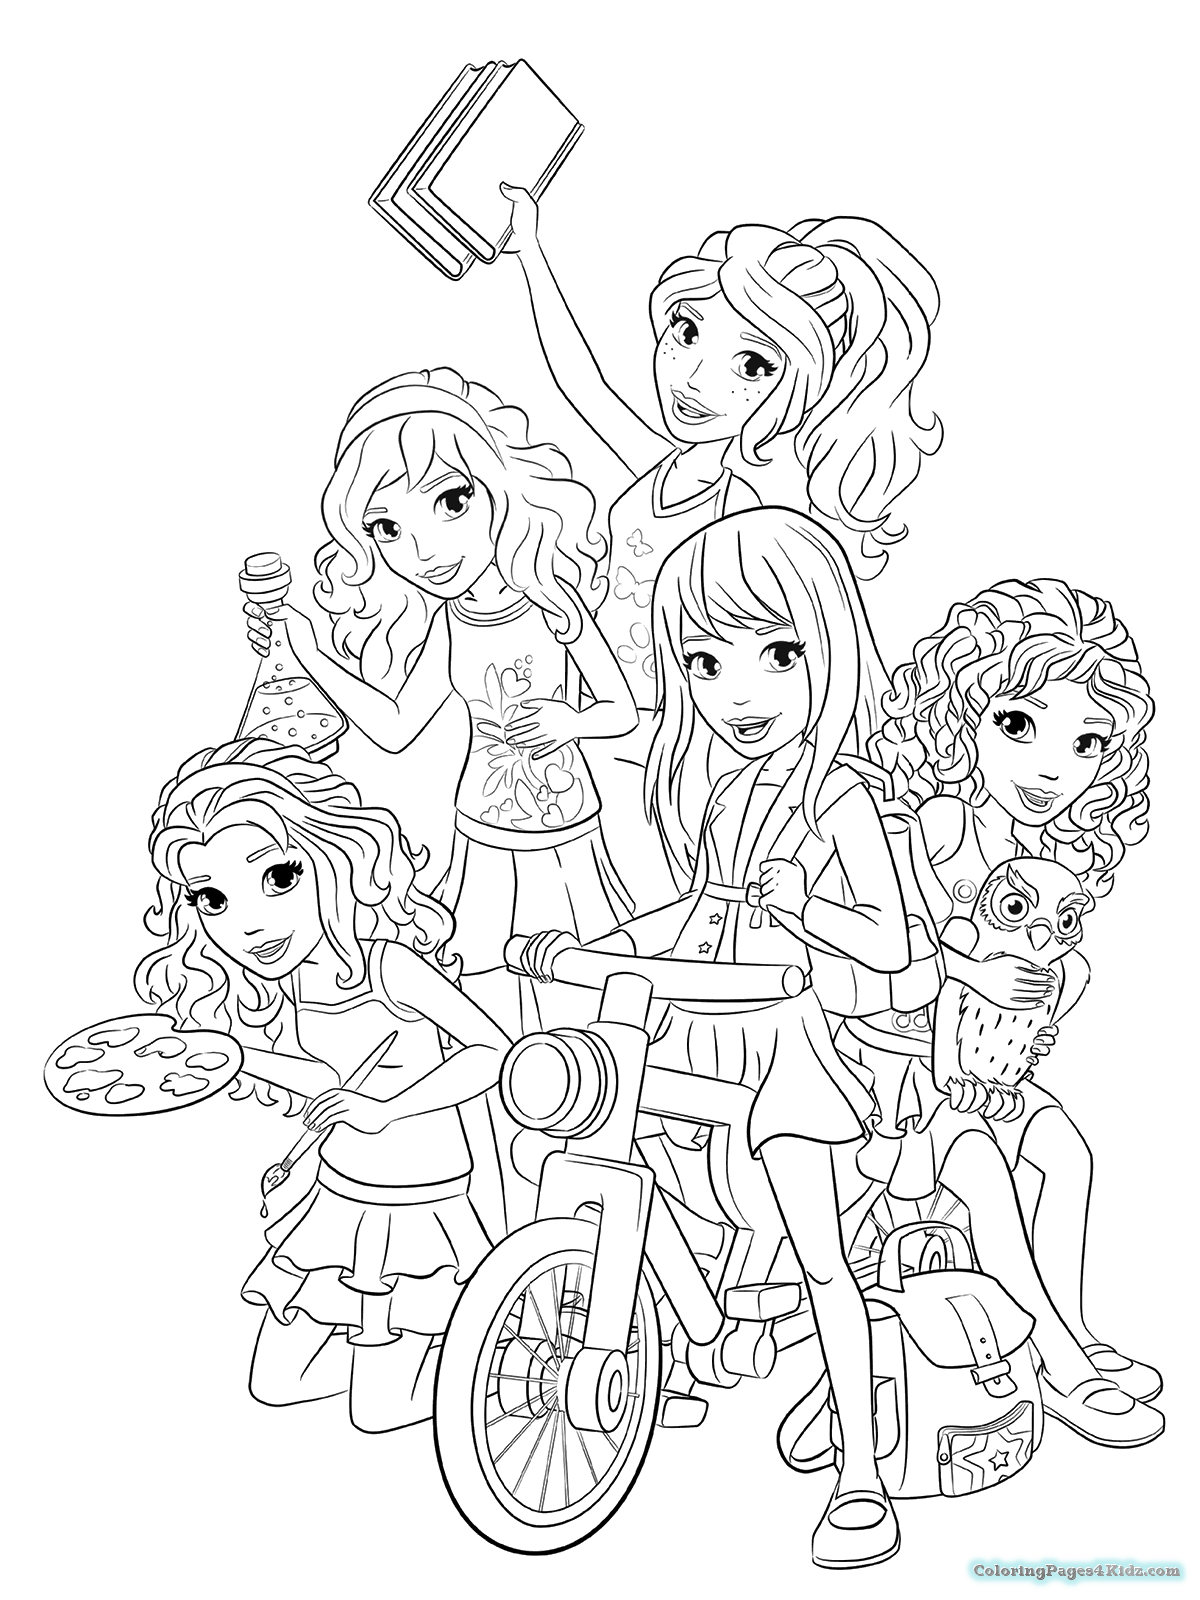 Lego Friends Coloring Pages - childlife.me | Lego coloring pages, Lego  friends birthday, Lego friends birthday party